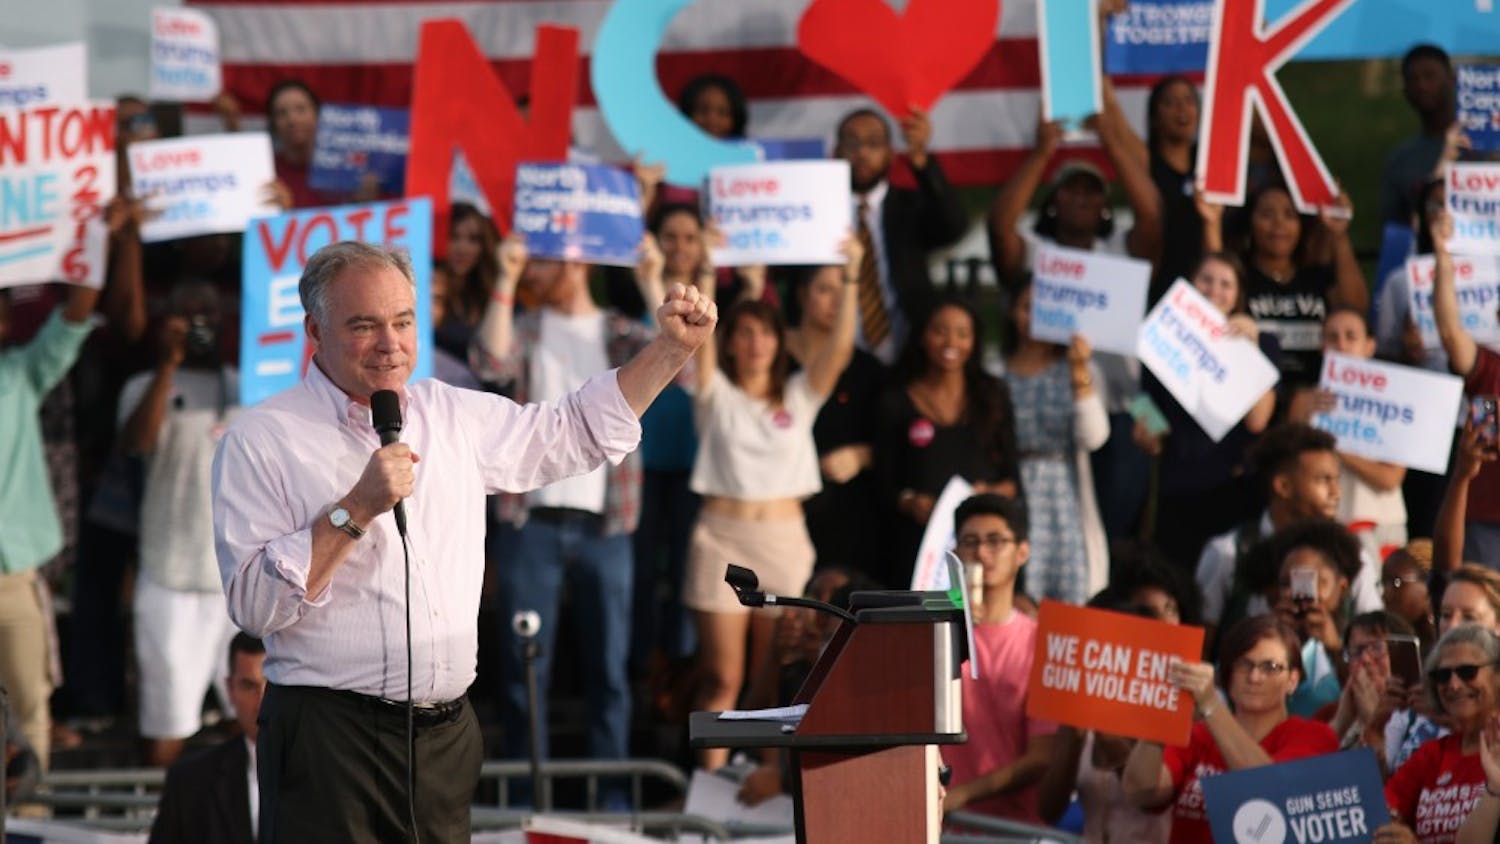 Democratic vice presidential nominee Tim Kaine led a rally at North Carolina Central University Thursday afternoon to promote early voting.